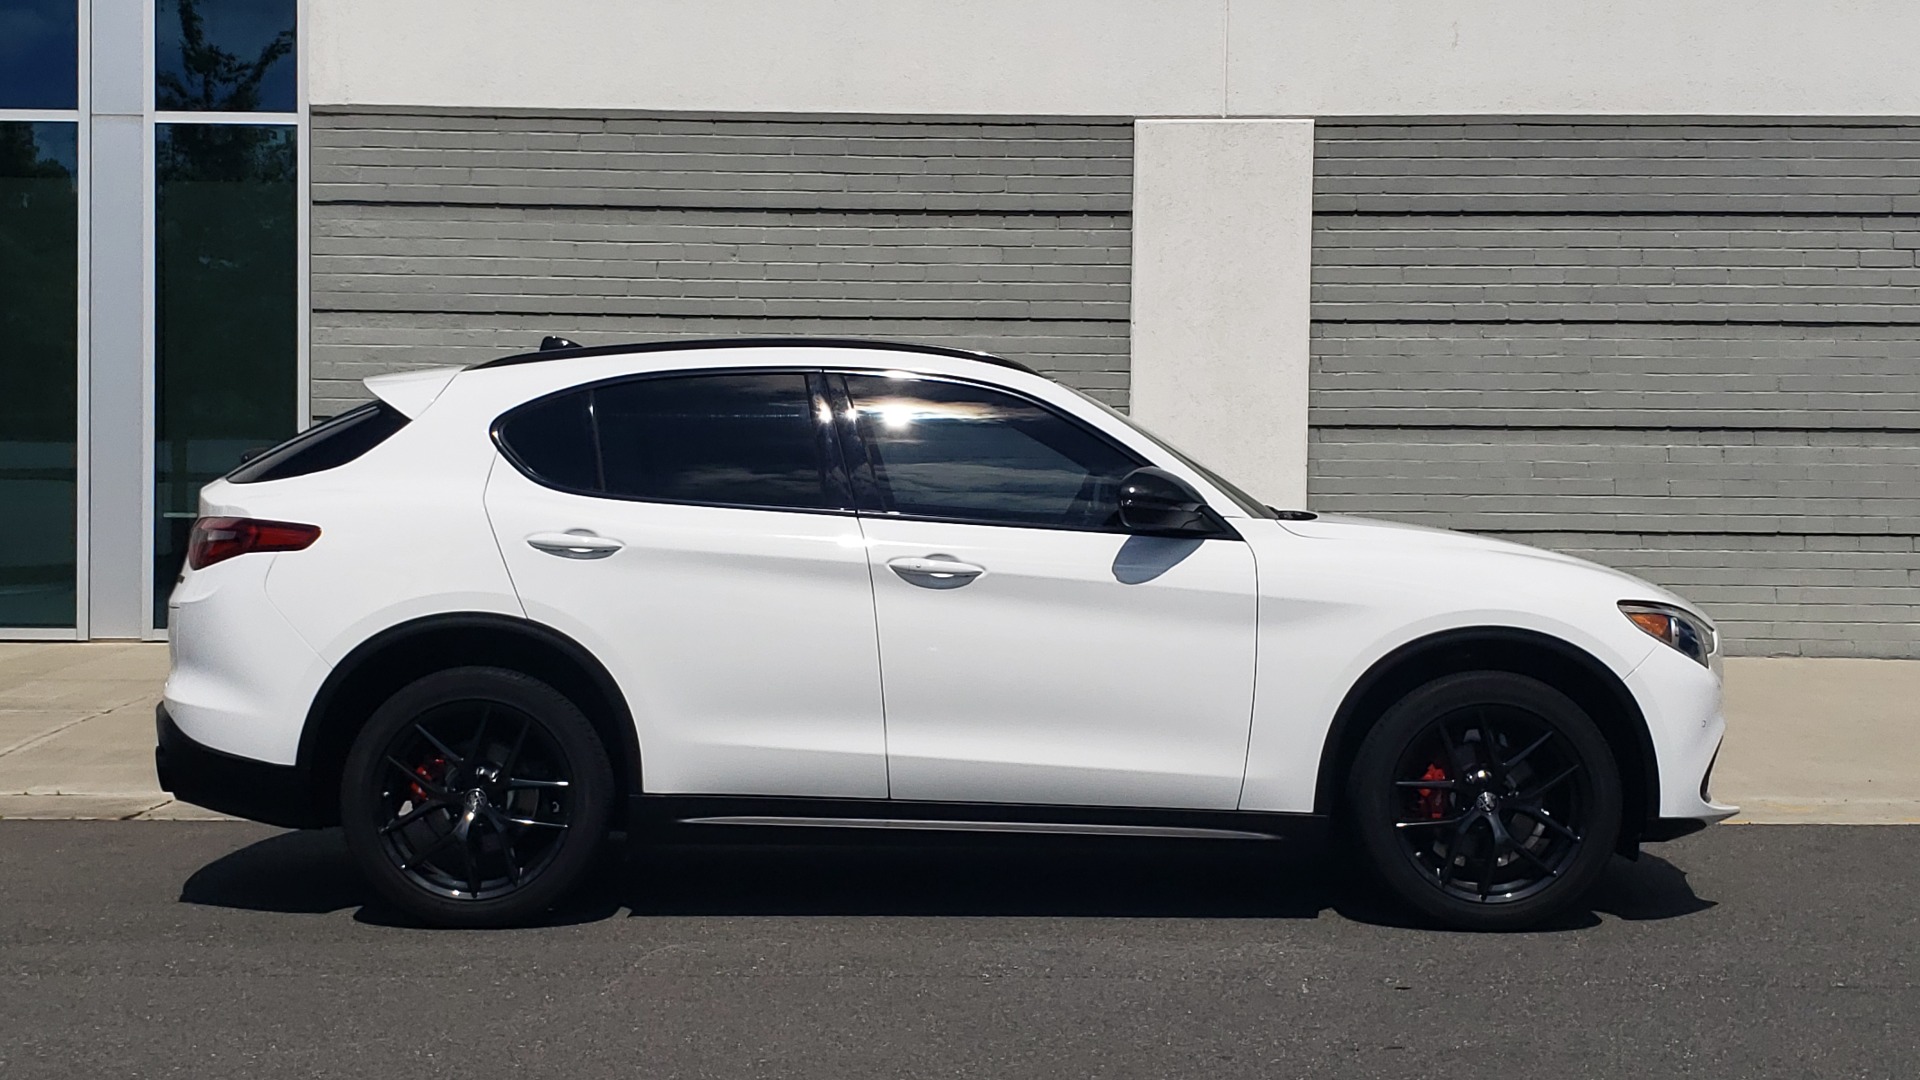 Used 2019 Alfa Romeo STELVIO TI SPORT AWD / 2.0L TURBO / 8-SPD AUTO / DRVR ASST / REARVIEW for sale Sold at Formula Imports in Charlotte NC 28227 9